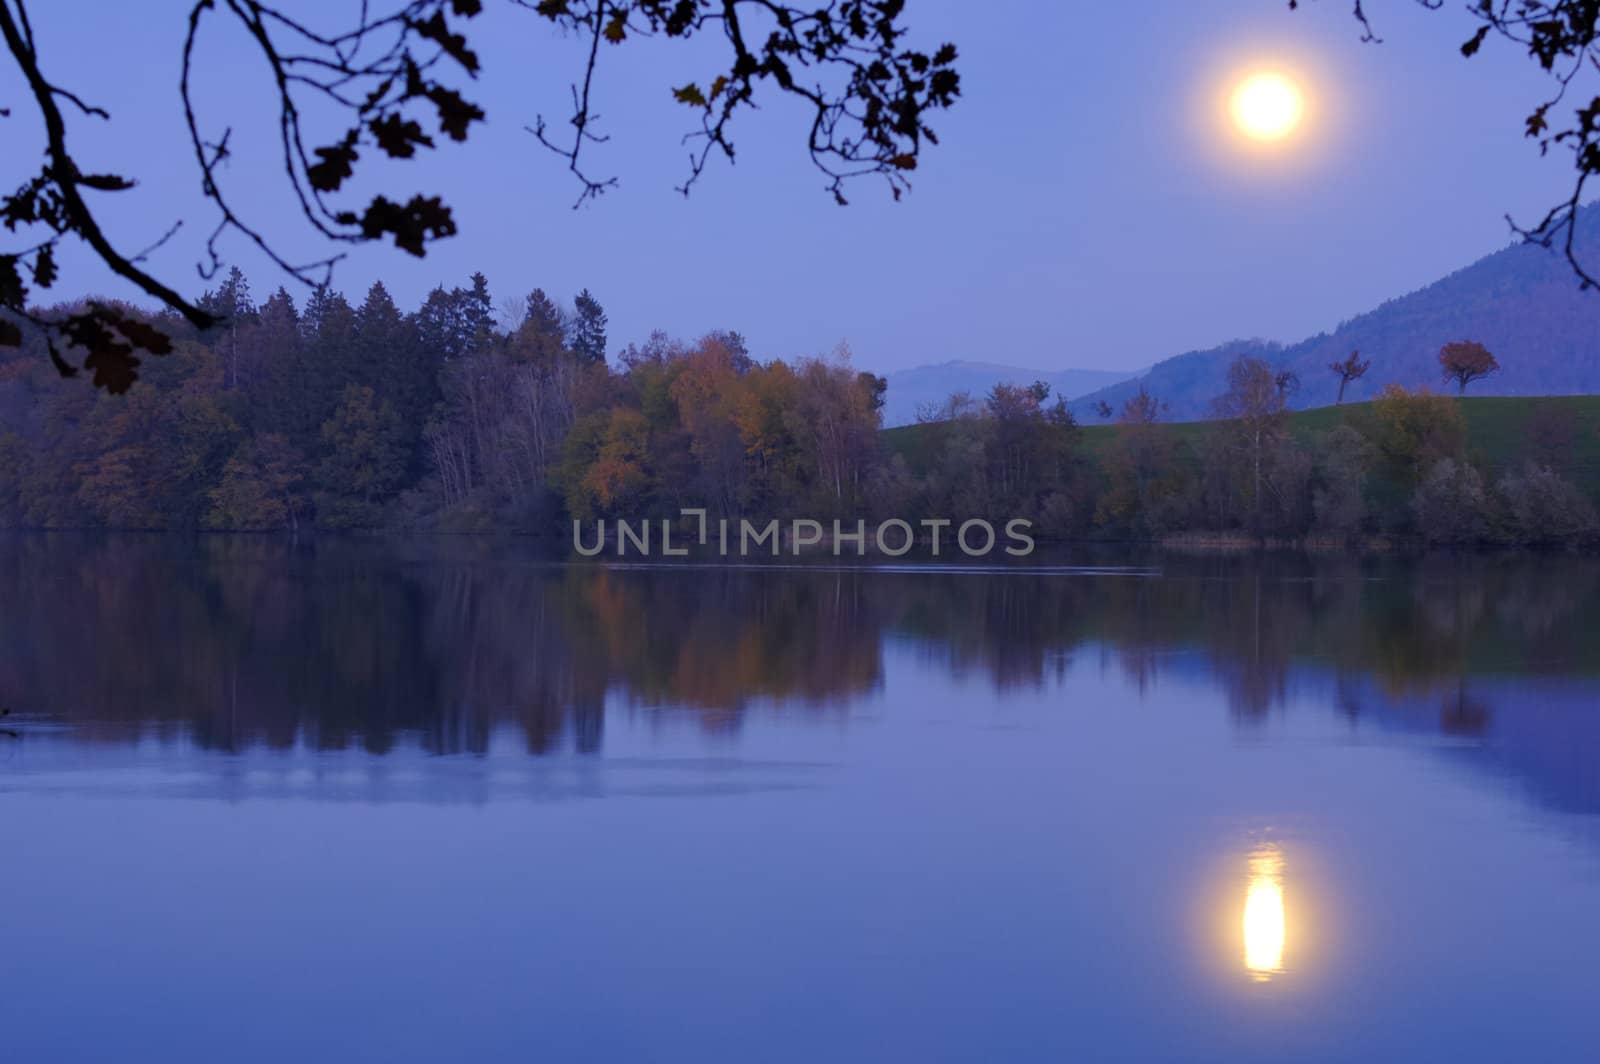 A bright full moon rising over a calm lake, framed by the branches of an oak tree in the foreground.. Space for text on the water of the lake.